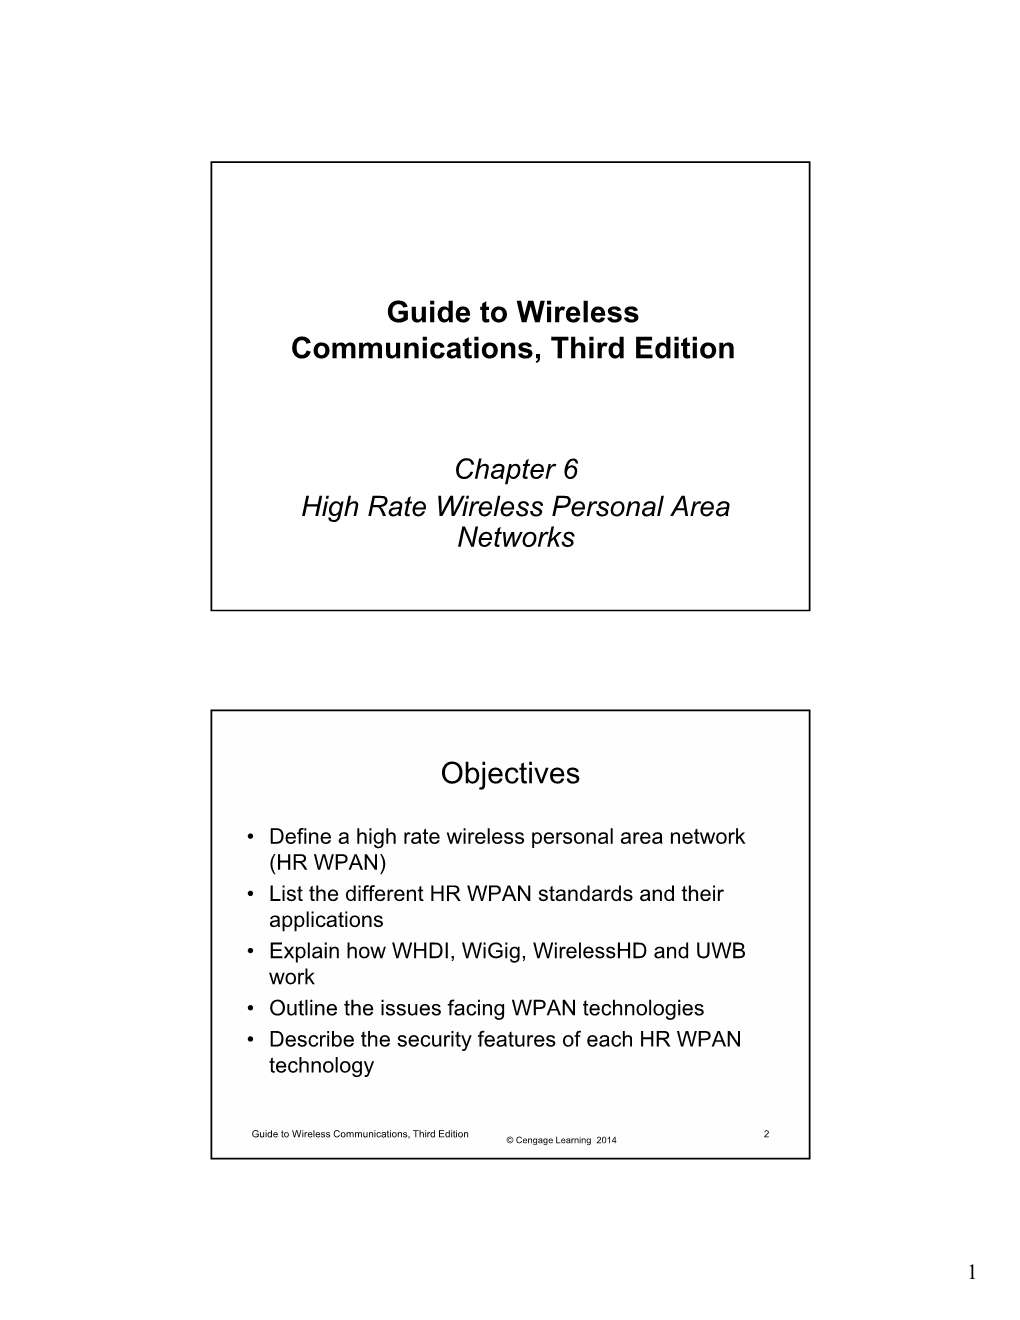 Guide to Wireless Communications, Third Edition Objectives